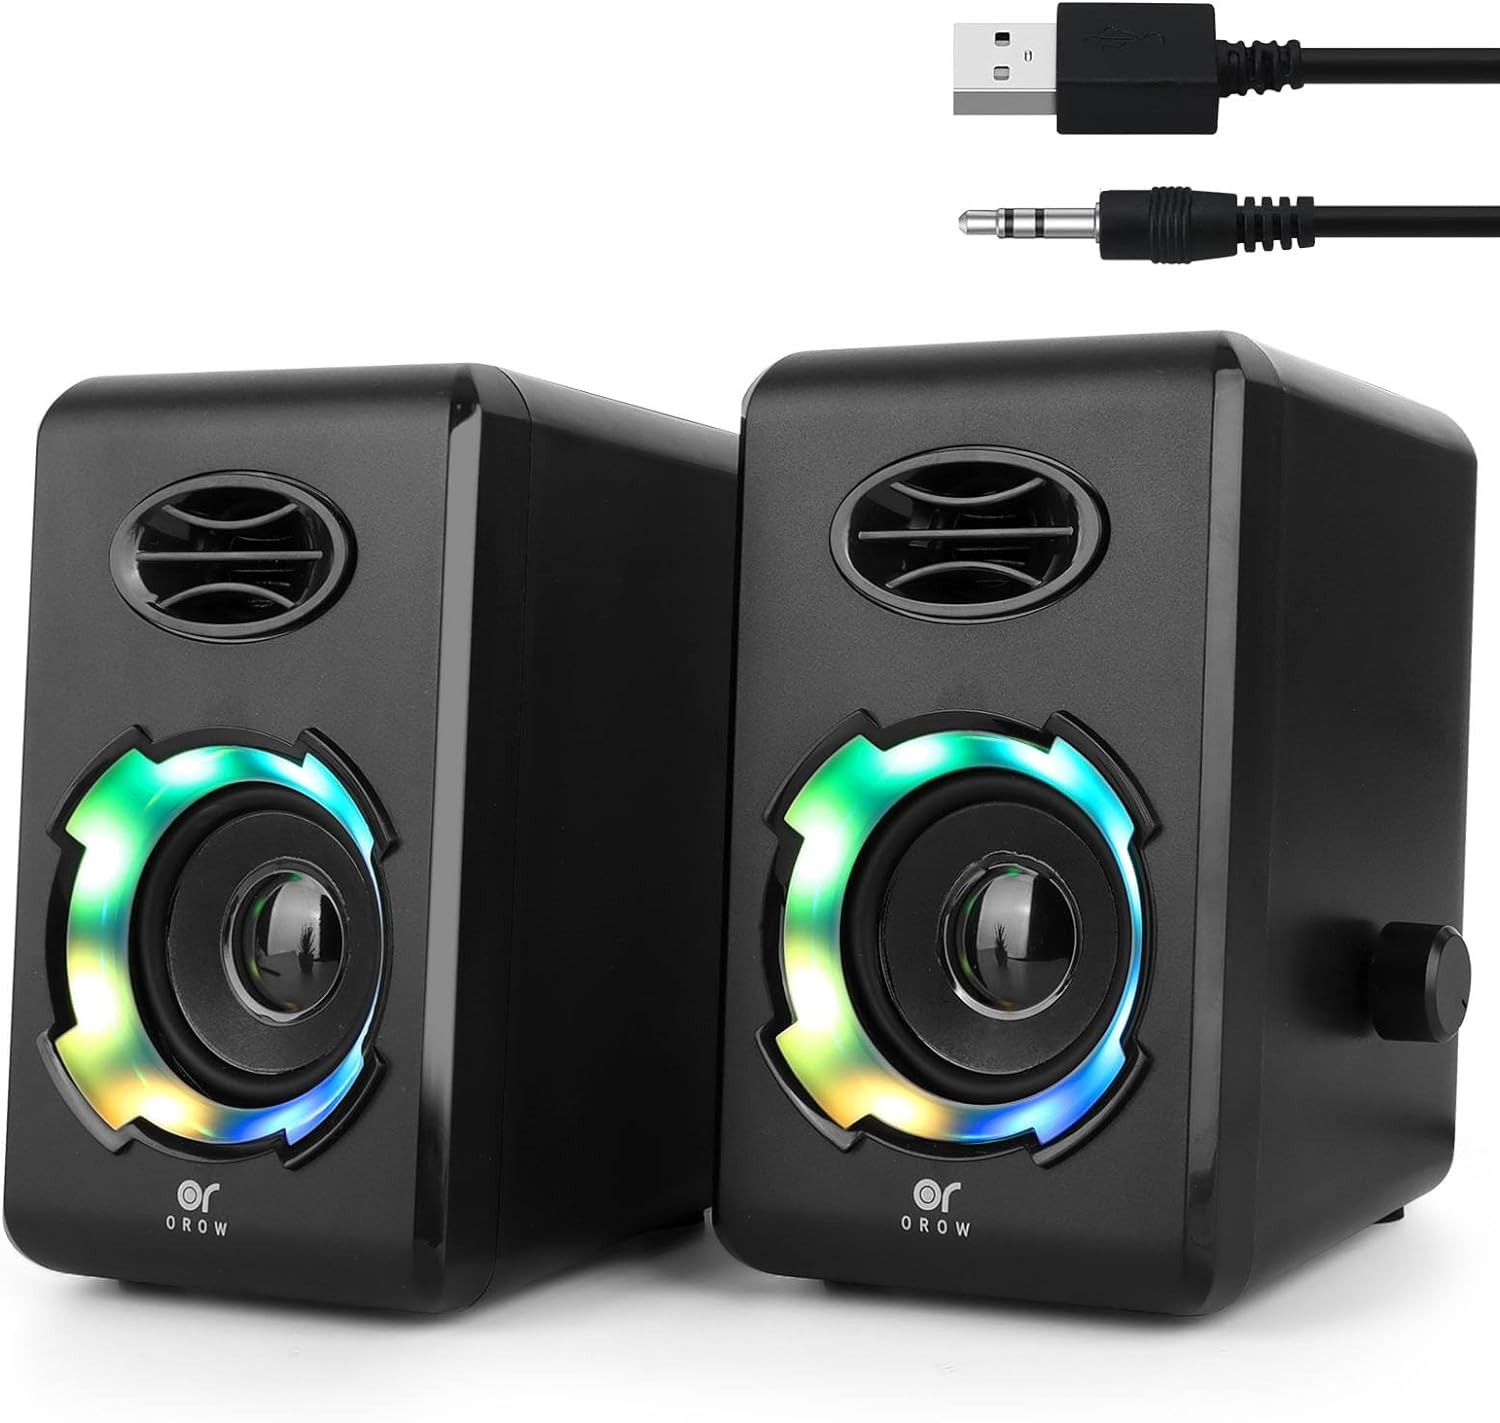 OROW Computer Speakers,10W Small Speakers Wired with Bluetooth,Stereo Sound 